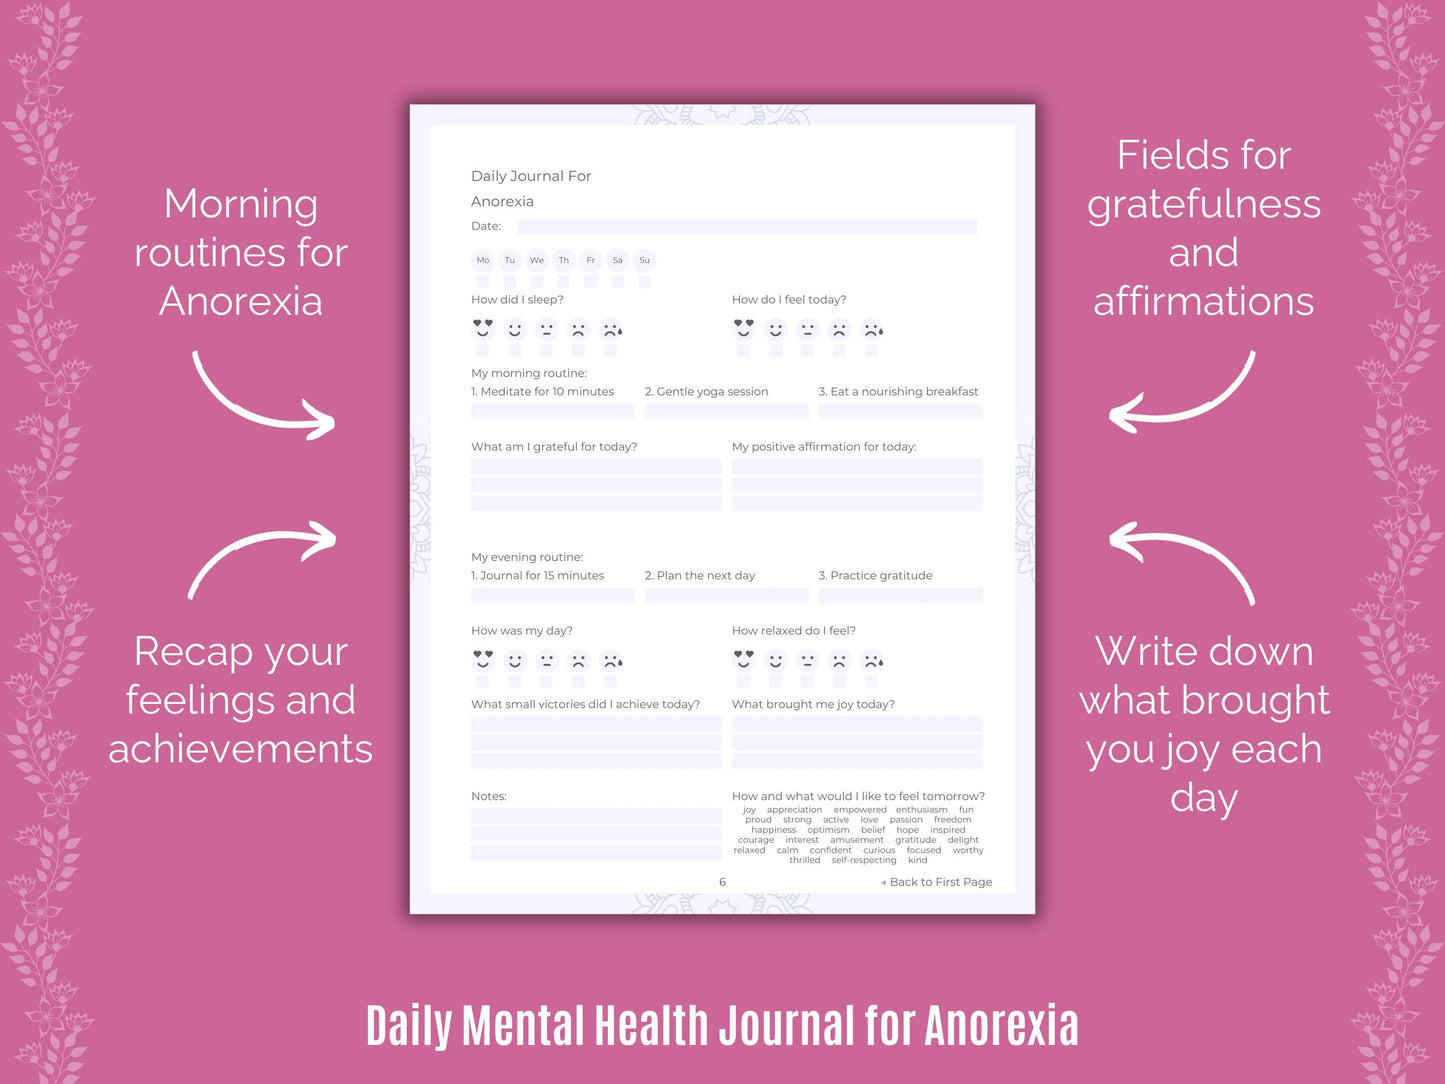 Anorexia Mental Health, Anorexia Templates, Anorexia Counseling, Anorexia Planners, Anorexia Journaling, Anorexia Tools, Anorexia Notes, Anorexia Journals, Anorexia Resources, Anorexia Workbooks, Anorexia Therapy, Anorexia Cheat Sheet, Goal Setting